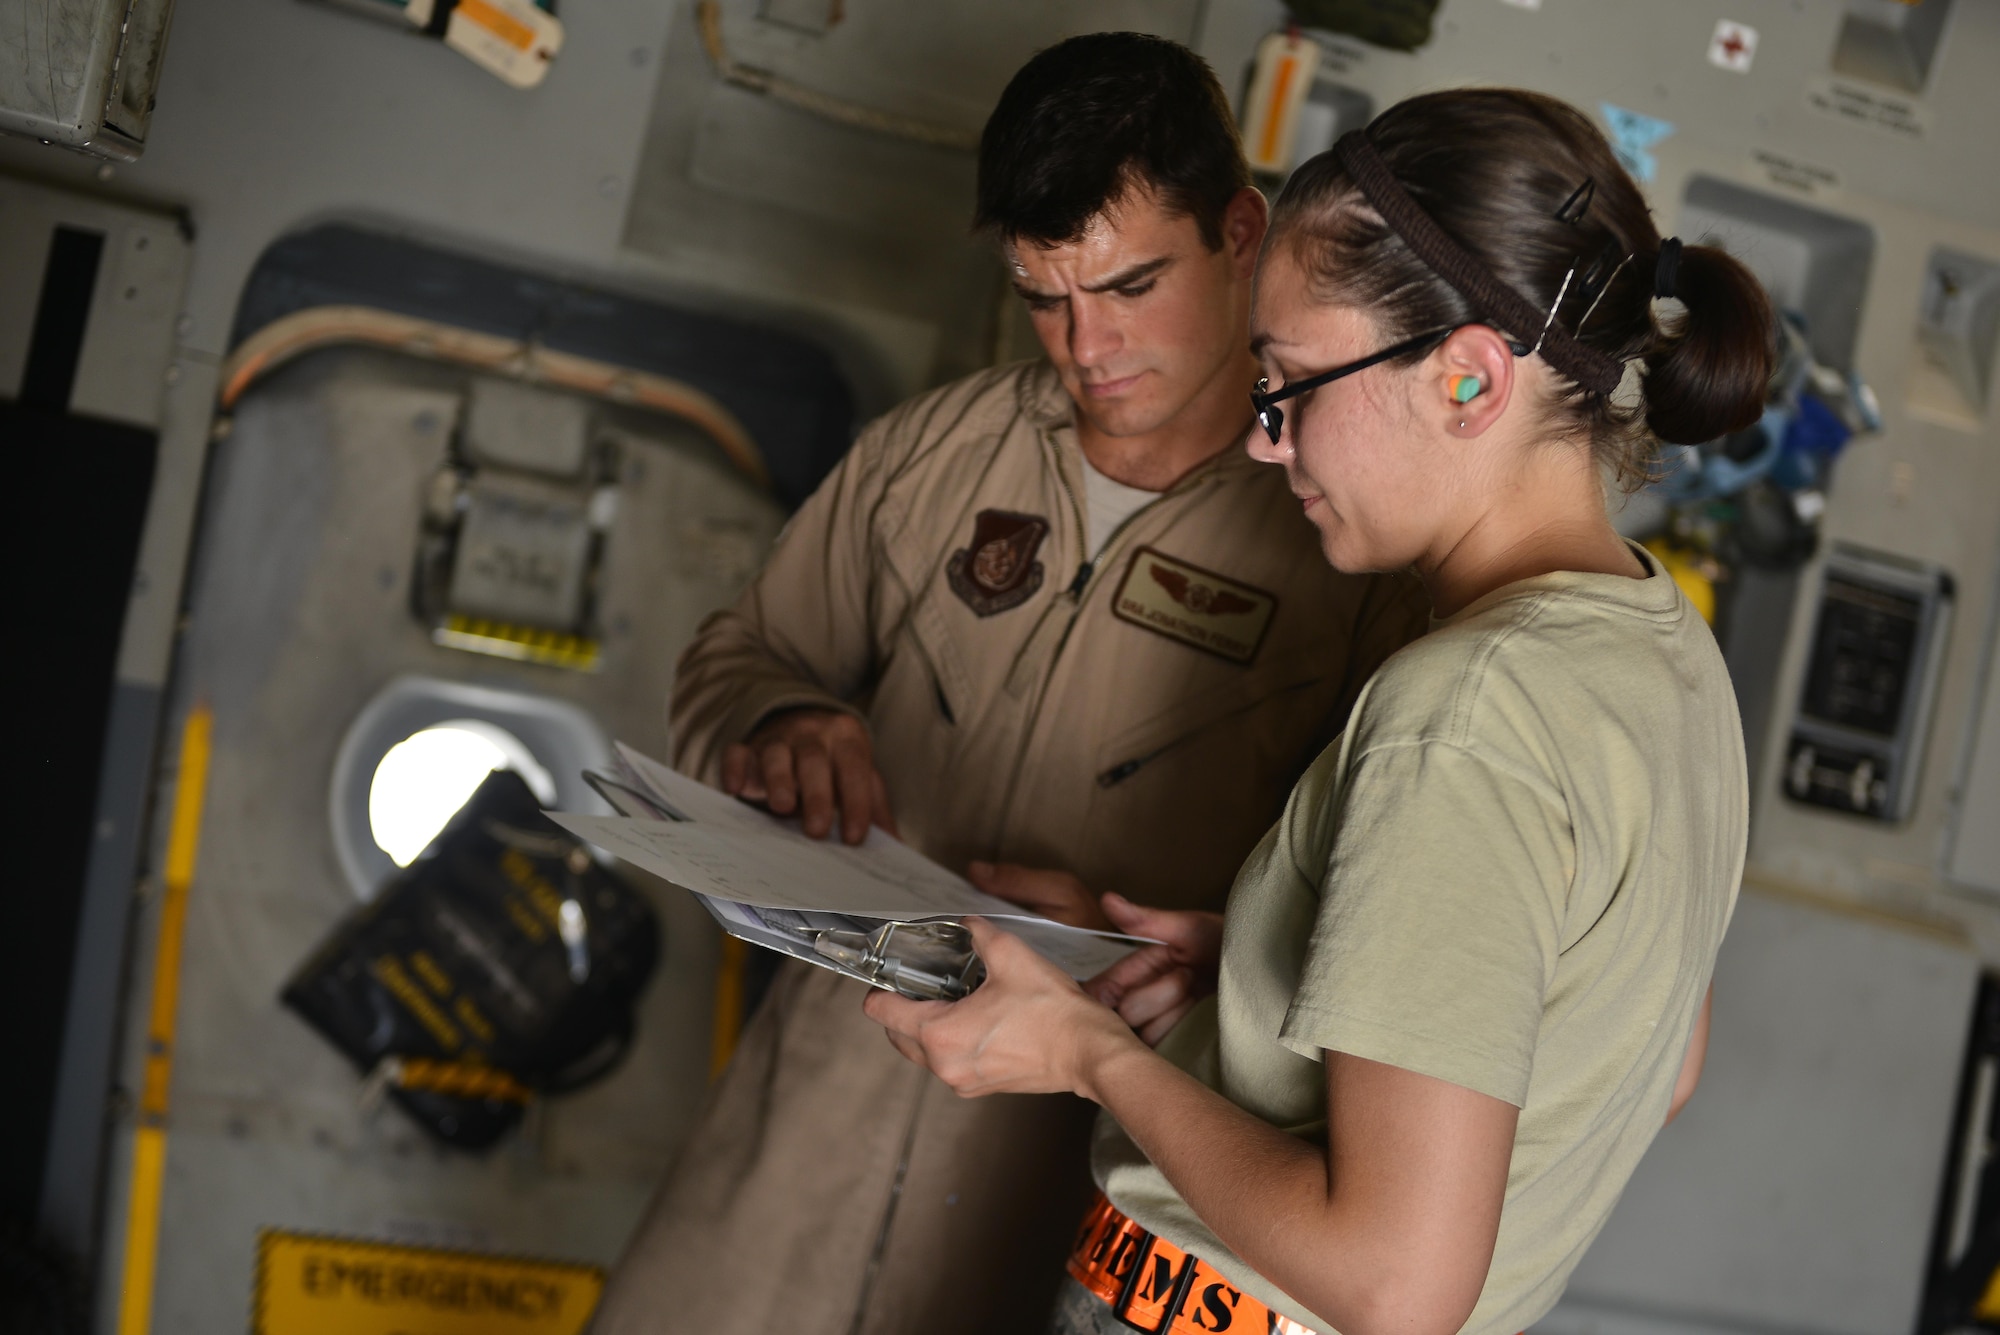 Senior Airman Jonathon Ferry, 816th Expeditionary Airlift Squadron and Airman 1st Class Kimberly Wolfgang, 8th Expeditionary Air Mobility Squadron, review an equipment manifest to configure weight distribution on a C-17 Globemaster aircraft May 13, 2015 at Al Udeid Air Base, Qatar. Airmen from separate squadrons deployed to Al Udeid helped support a mission for forward deployed members of RED HORSE Civil Engineering to repair a runway in Southwest Asia in support of Operation Inherent Resolve. (U.S. Air Force photo/Staff Sgt. Alexandre Montes)